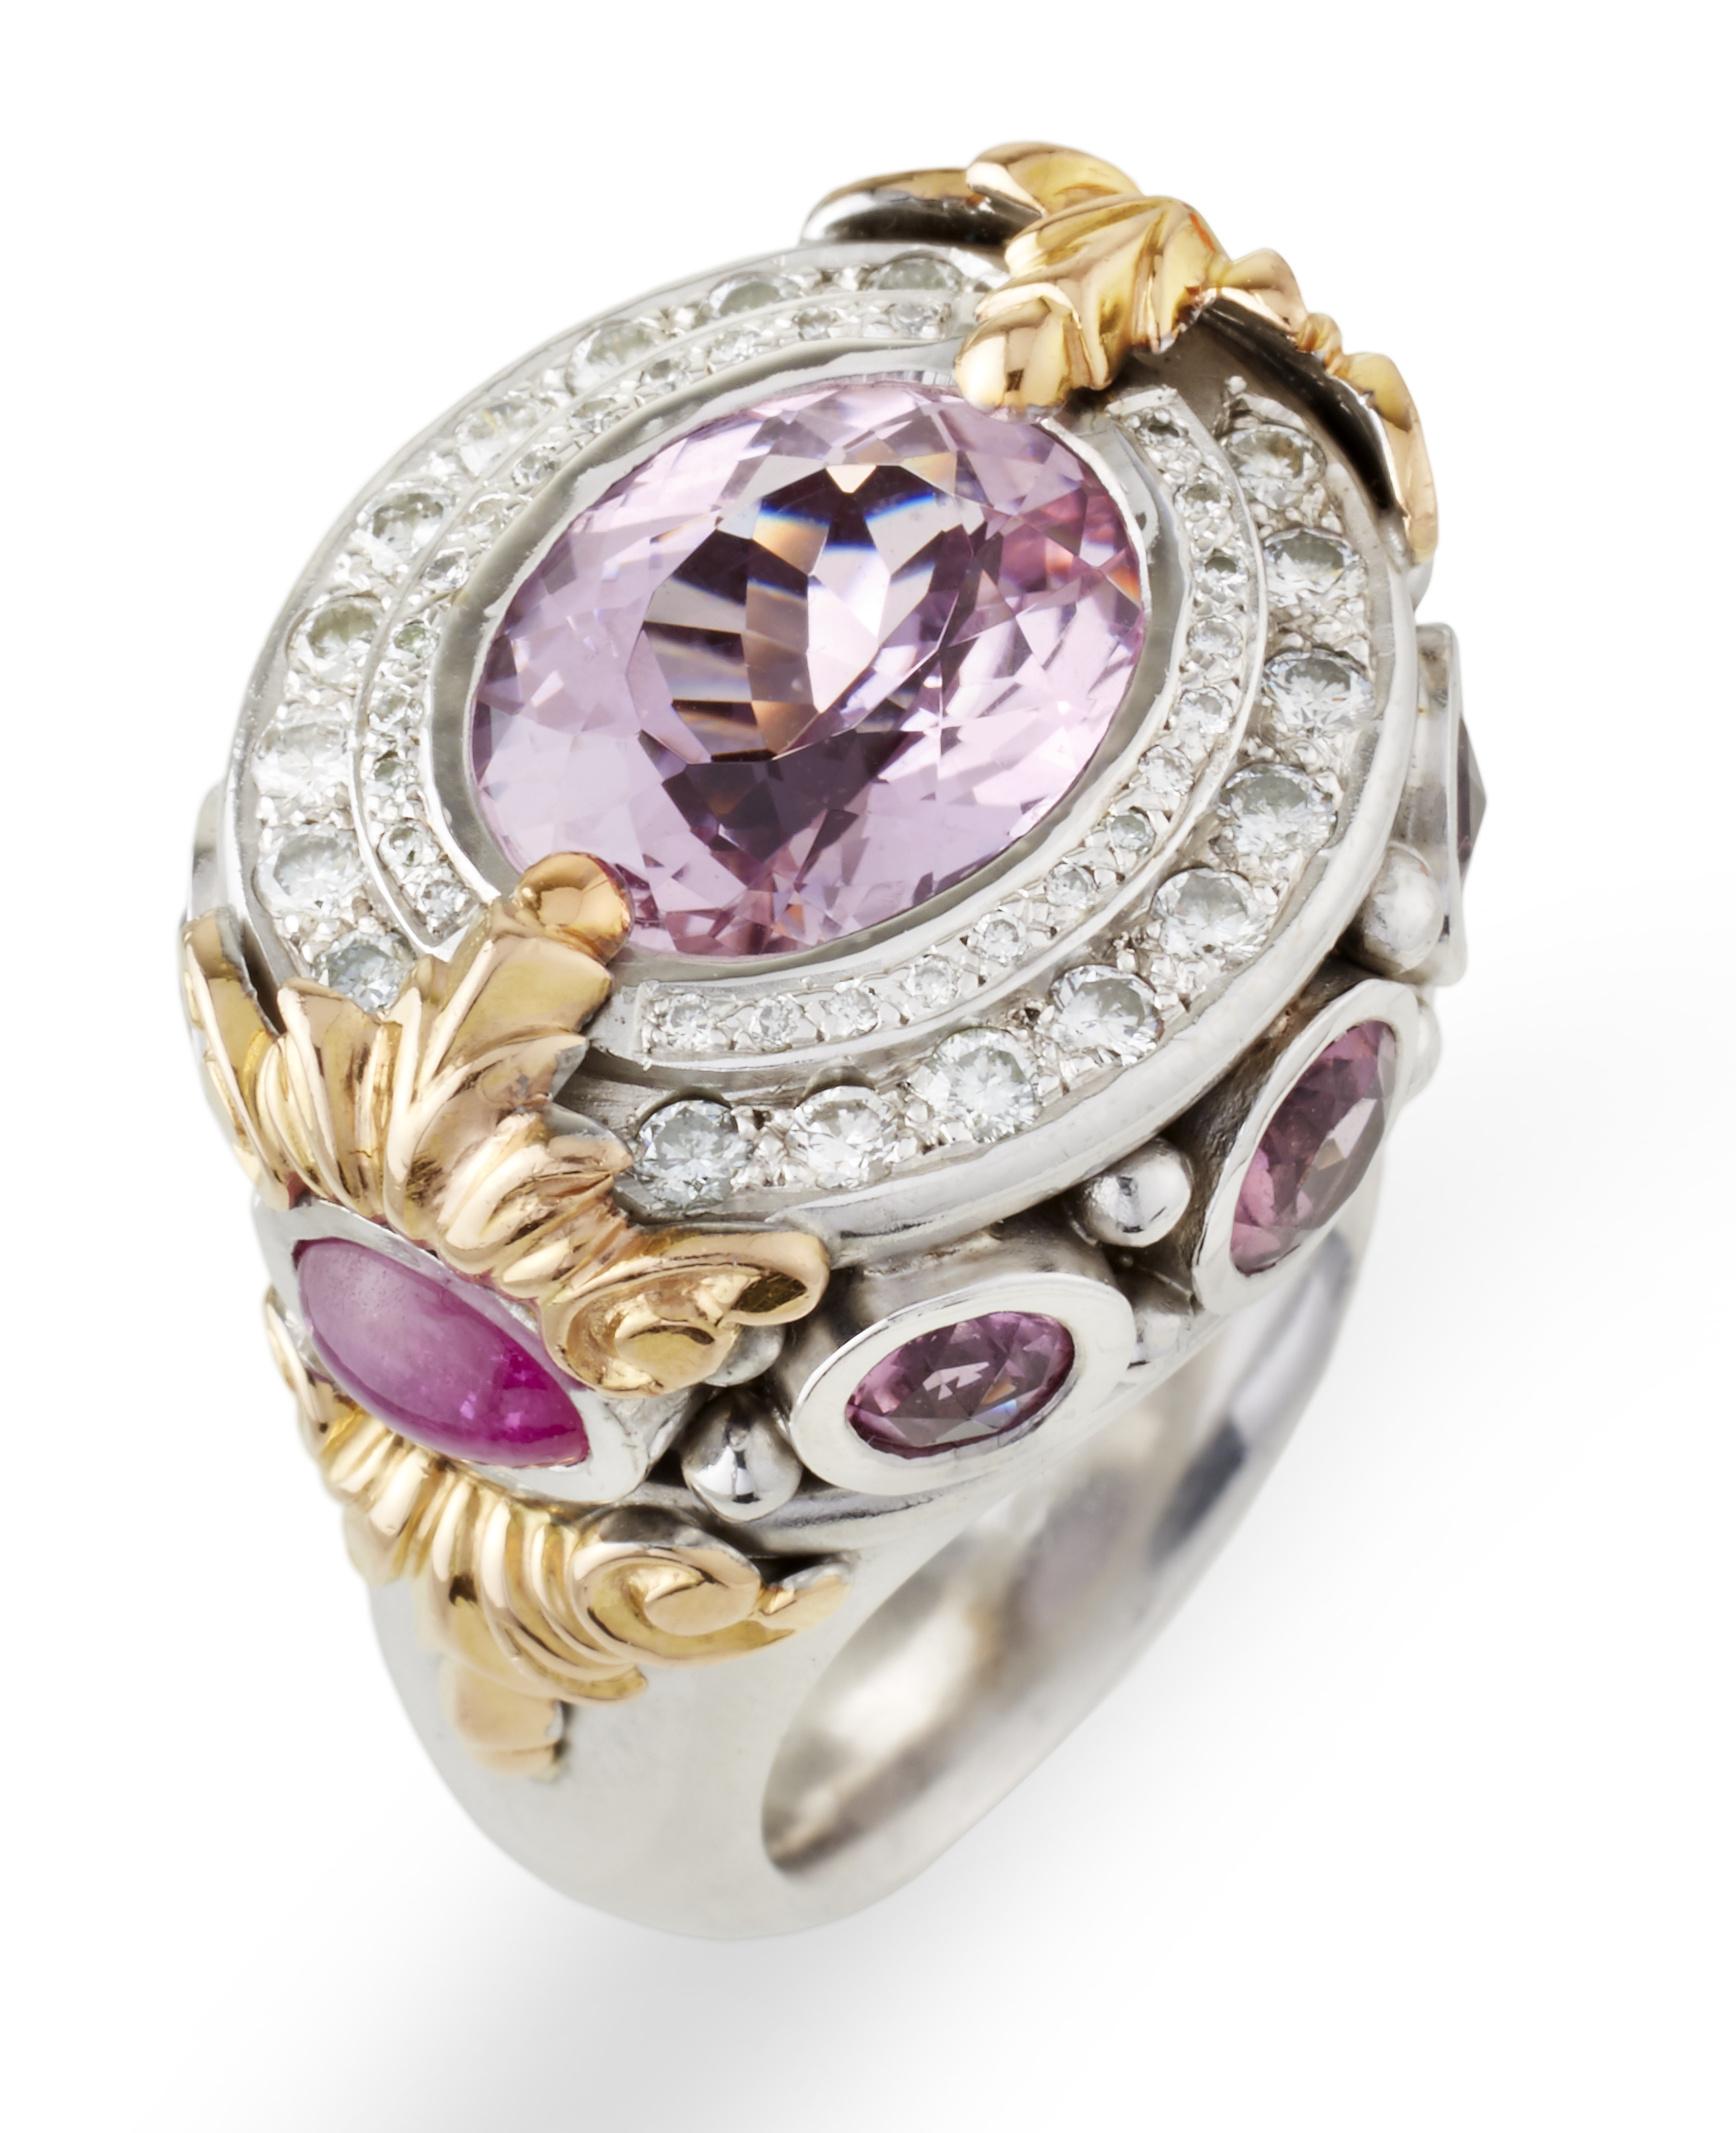 7.90 Carat Kunzite Ring with 2.53 Carat Spinel and .80 Carat Diamonds For Sale